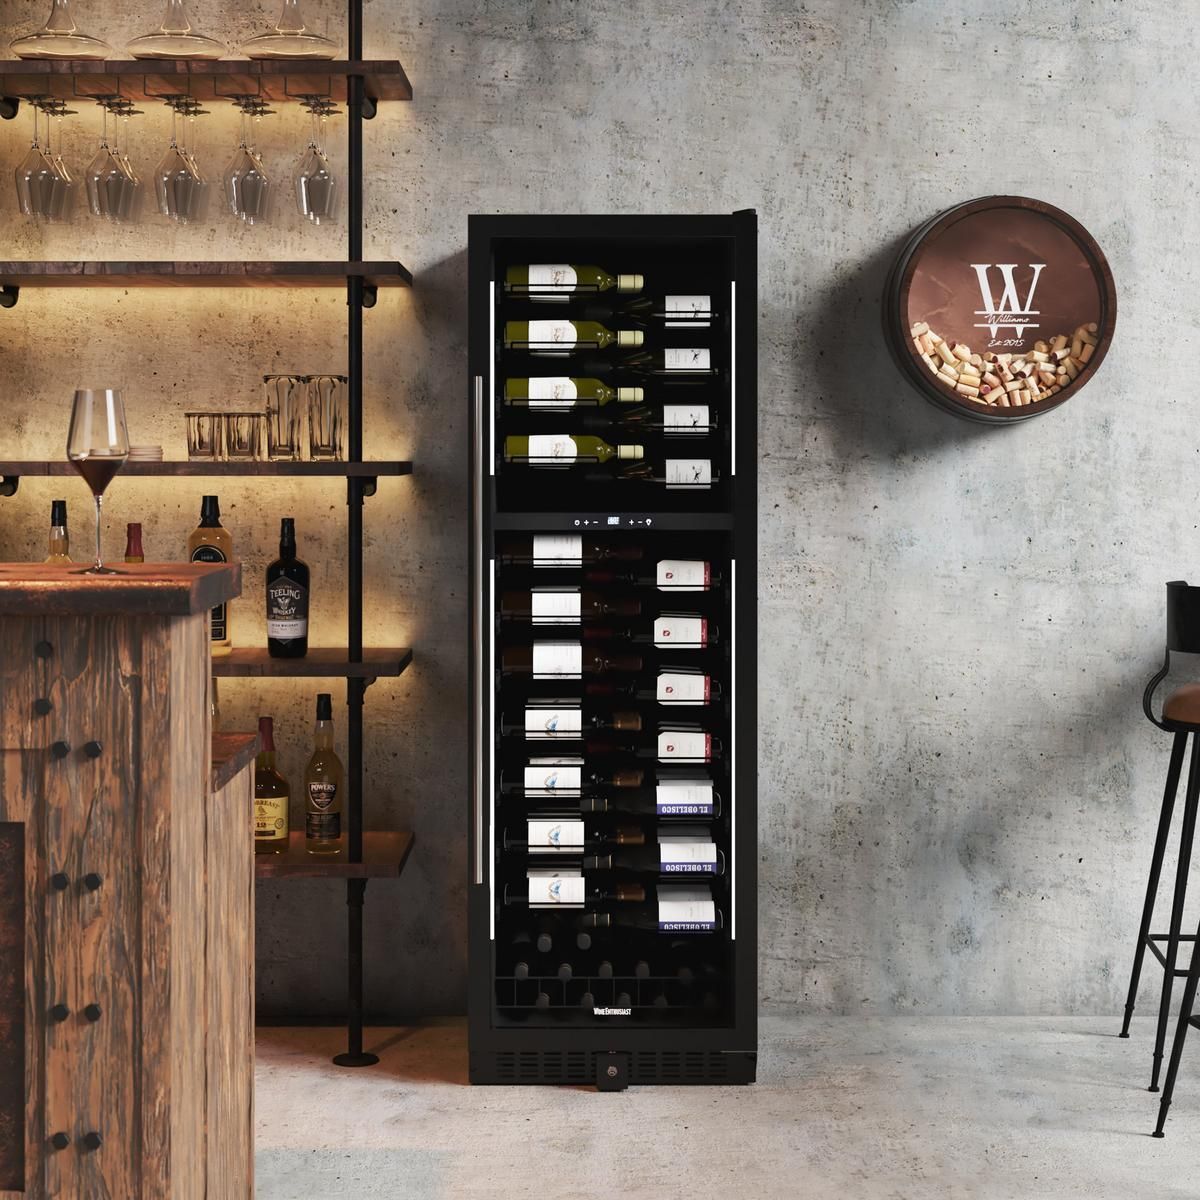 Enjoy the beauty of your labels with our VinoView Wine #Cellars. 🍷⁠
⁠
Sale ends in 2 days. Shop 10% off all units here 👉️ enth.to/3QnCnkQ